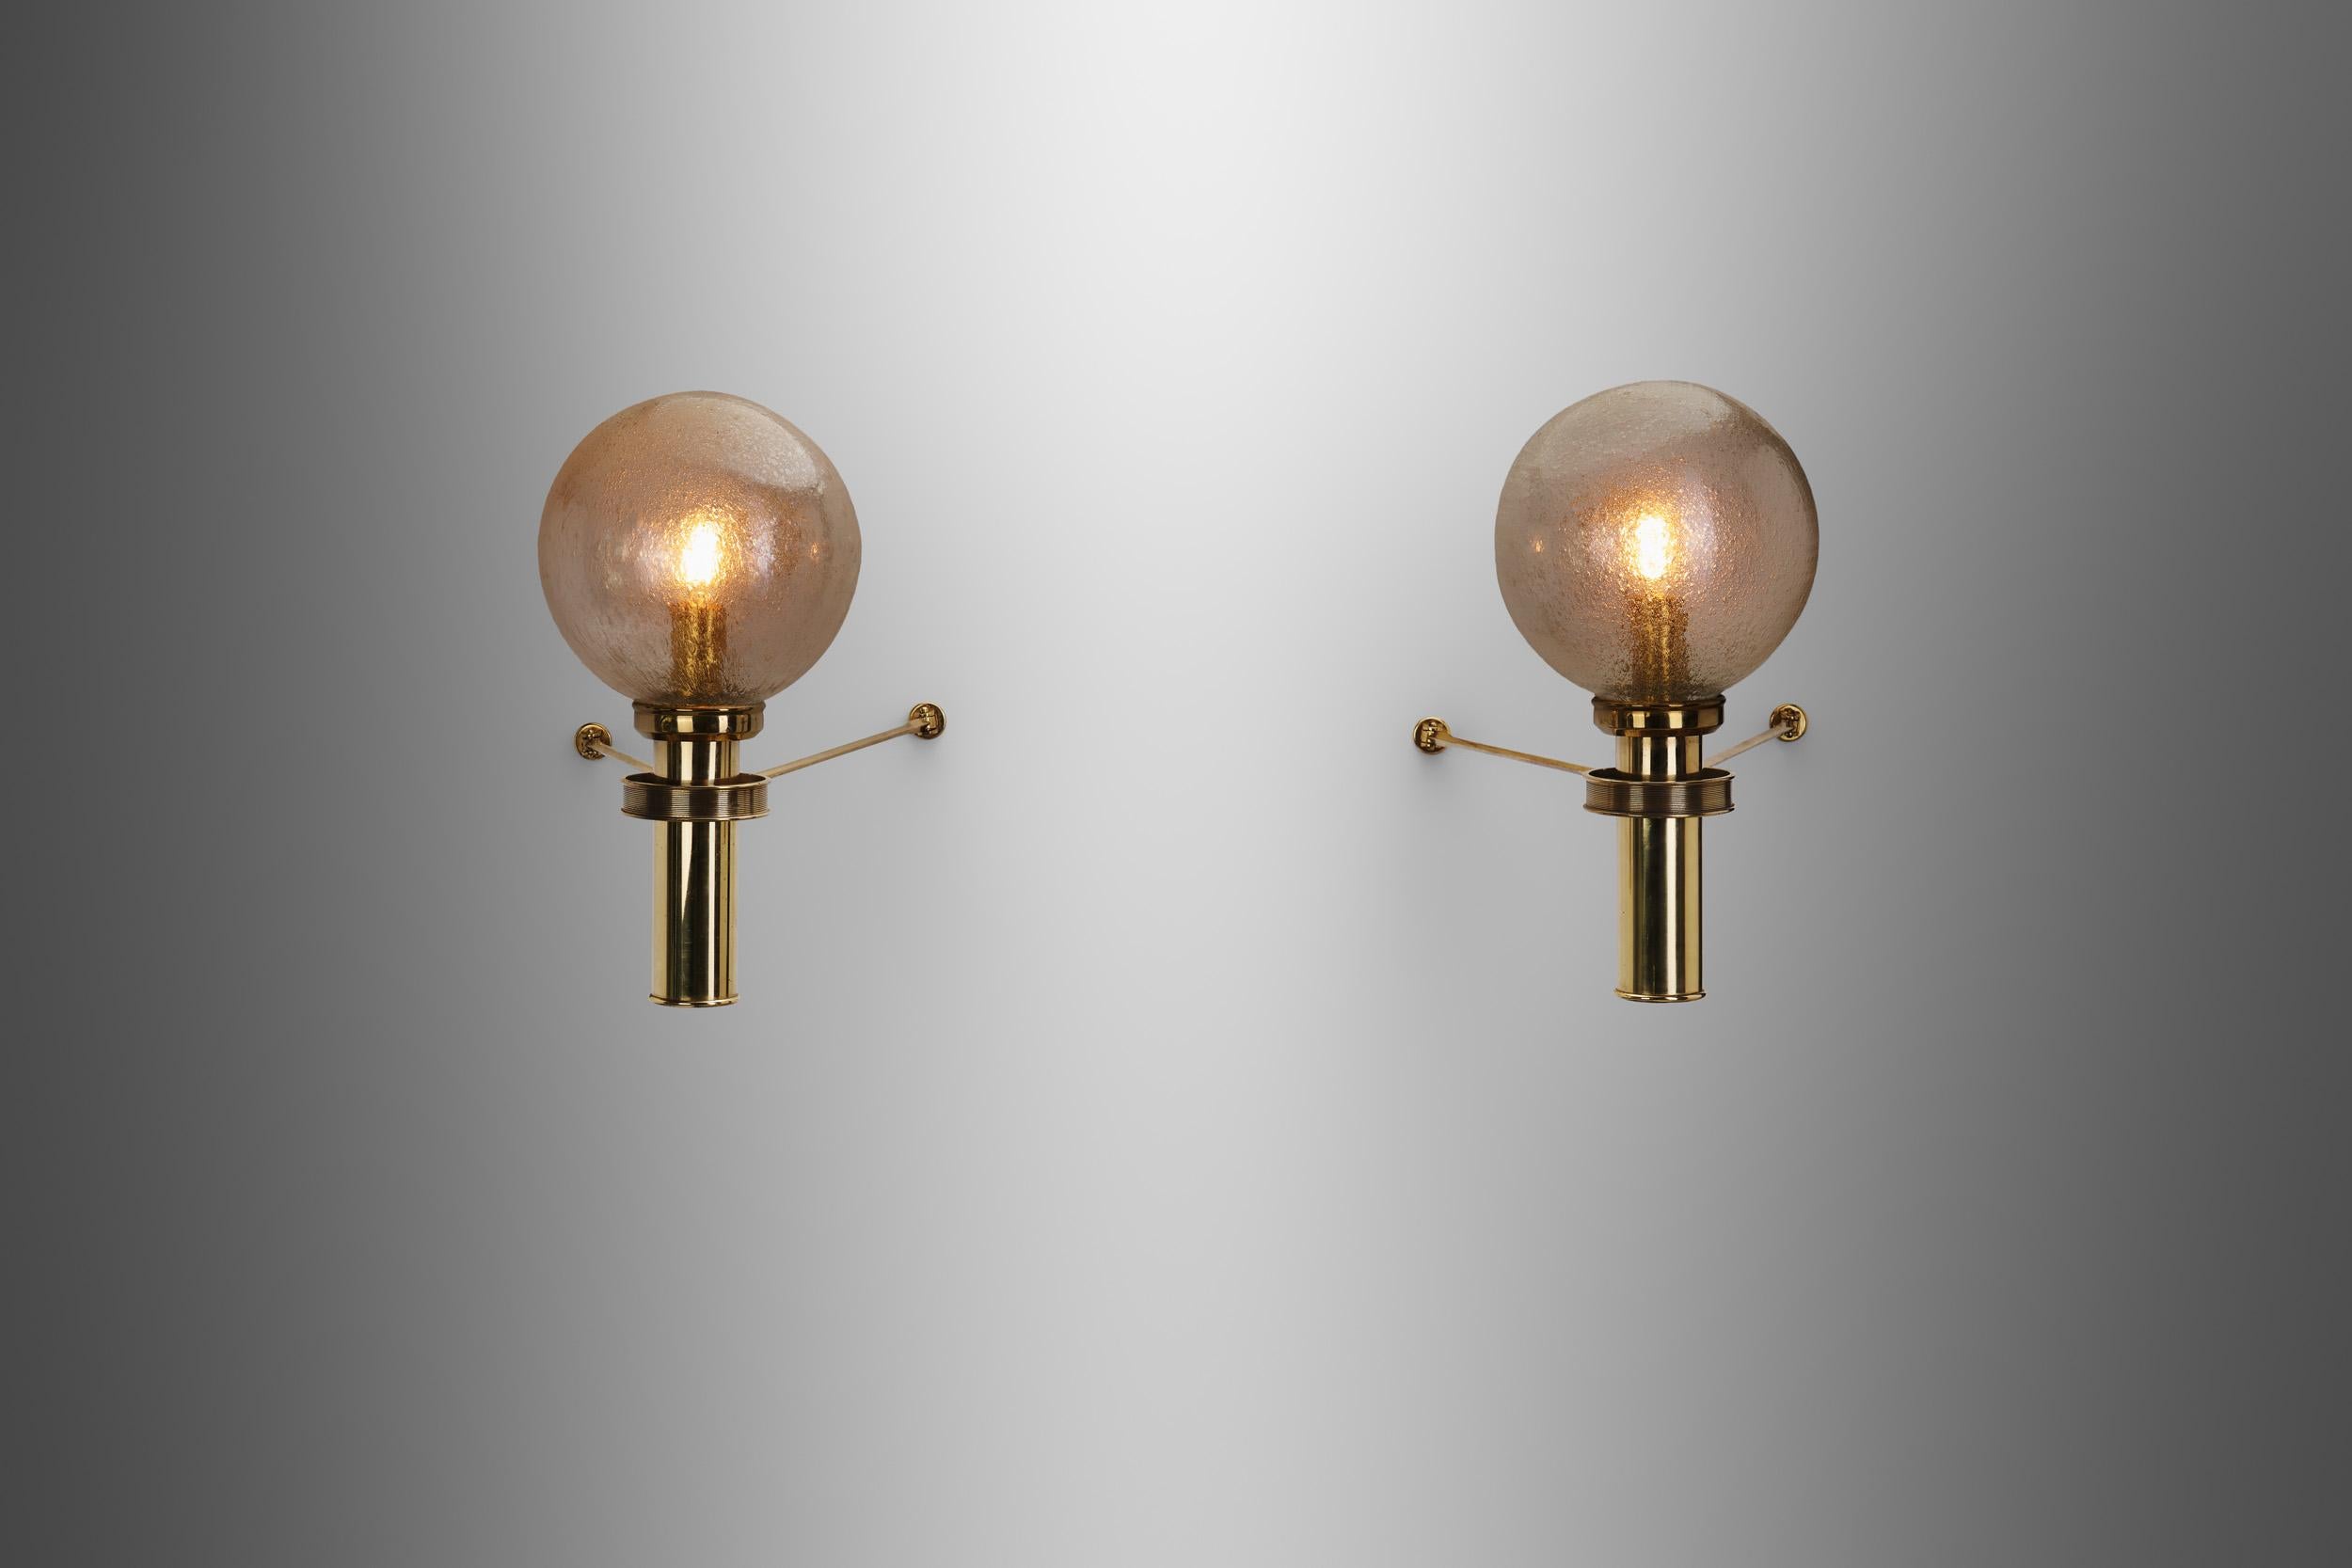 Mid-20th Century Large European Modern Wall Sconces in Brass & Bubble Glass, Europe, circa 1950s For Sale